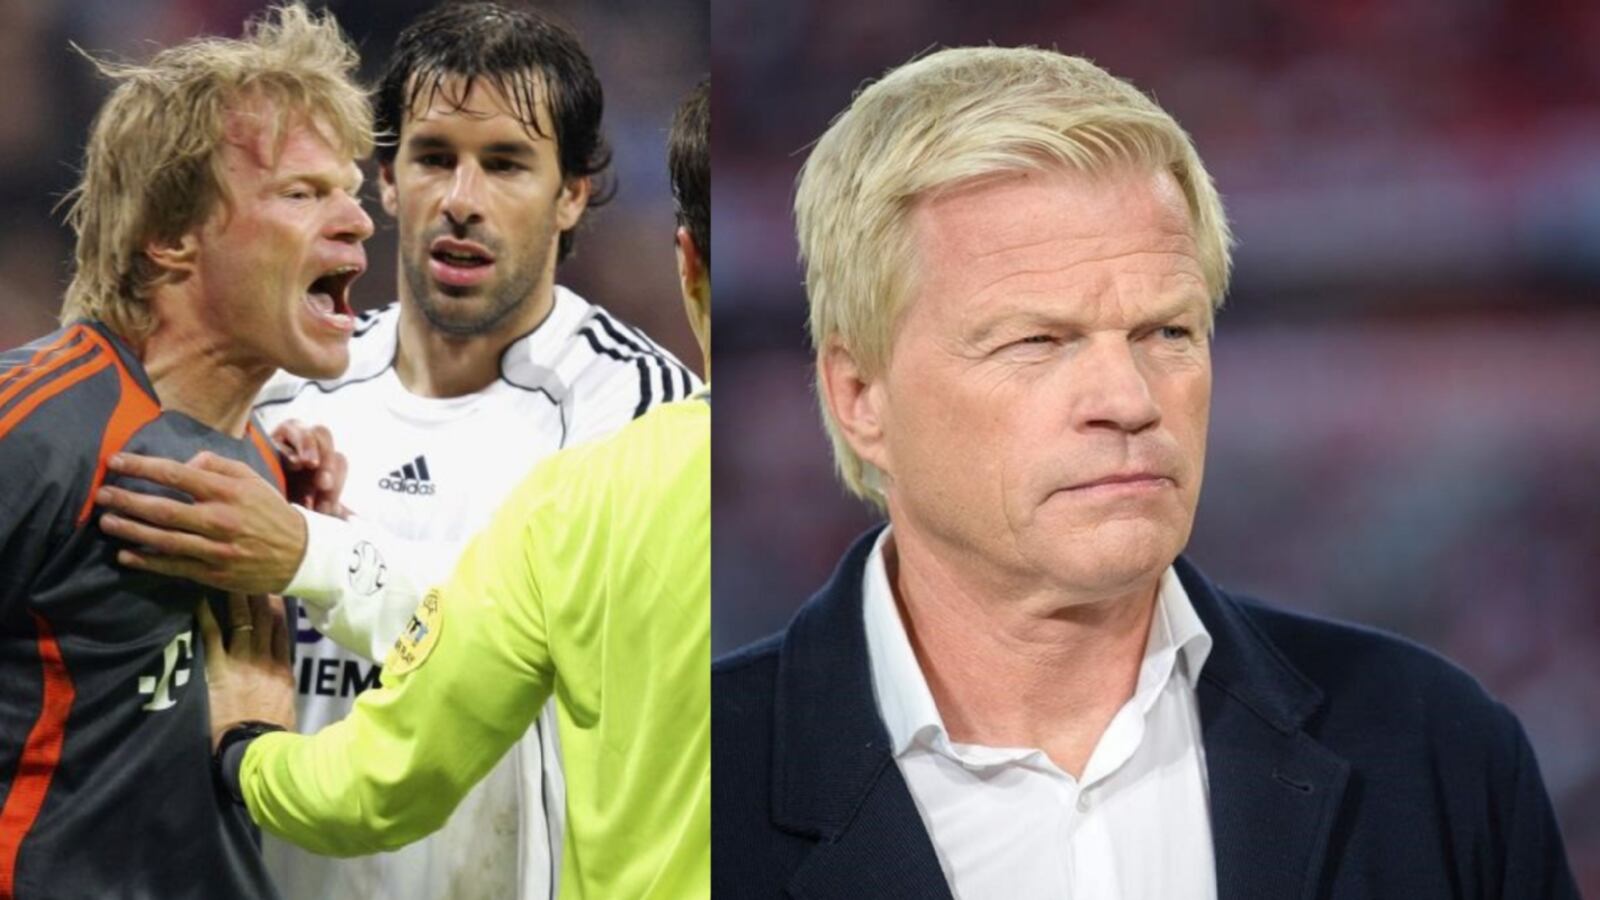 Oliver Kahn surprises in his new job at Bayern Munich and shows a facet as a person that was never seen